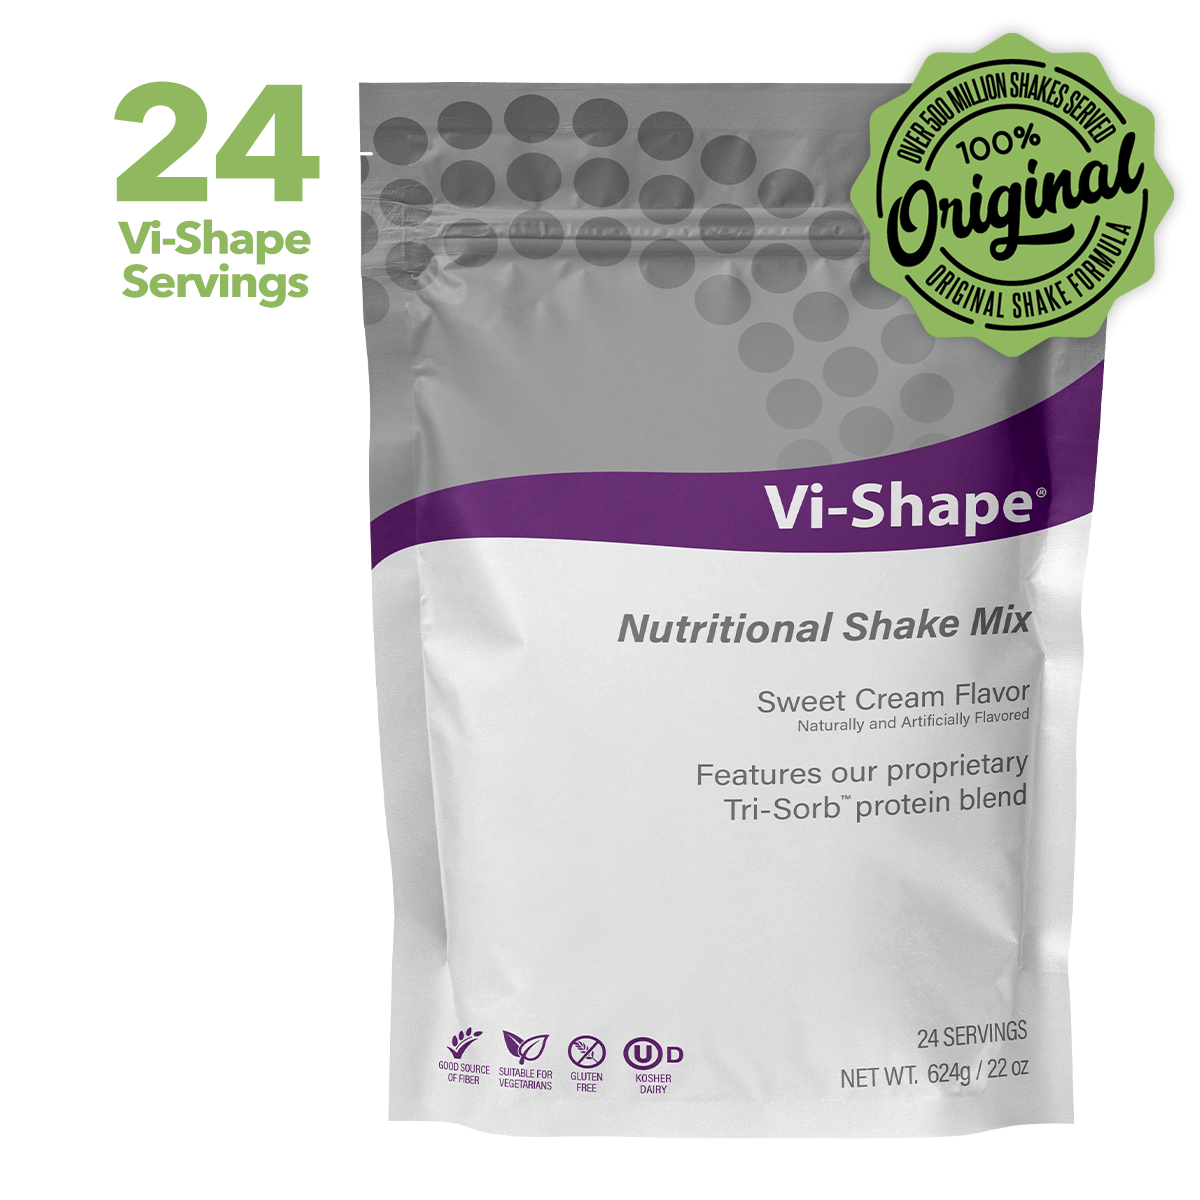 24-serving pouch of Vi-Shape Shake Mix